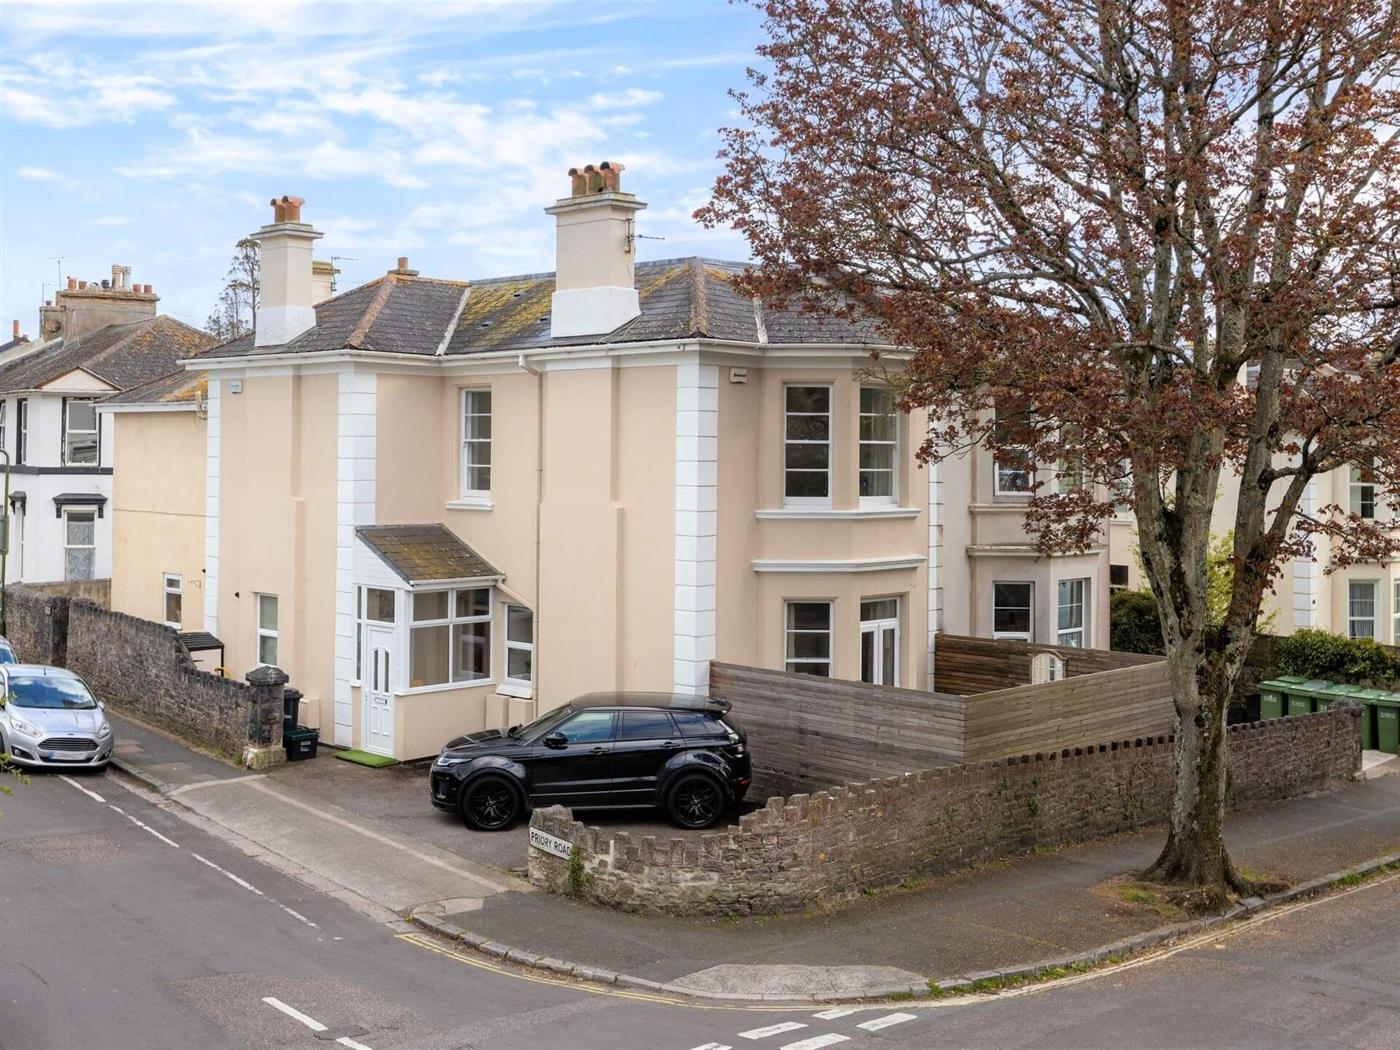 3 Bedroom Semi-Detached House to Rent (Let): Priory Road, St. Marychurch, Torquay, TQ1 4NH